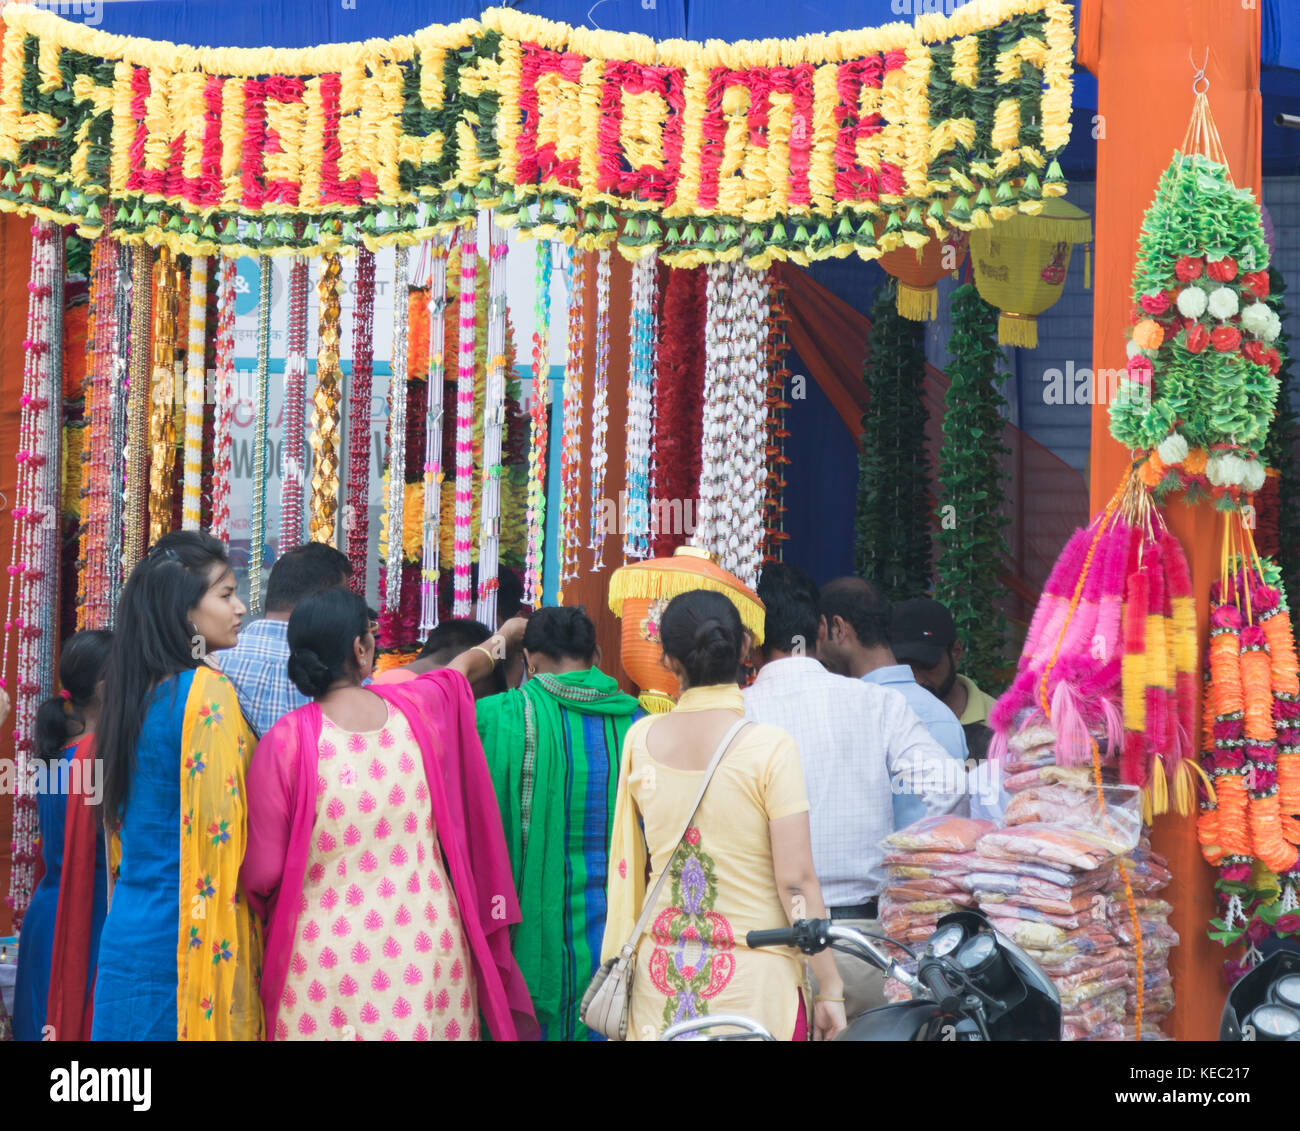 Nakodar, Panjab, India. 19th October 2017.  Diwali or the festival of lights is widely celebrated across India . It is a busy day as traders and stalls promote their goods in one of the busiest shopping days of the year. Colourful display of goods , decorations and food. Stock Photo